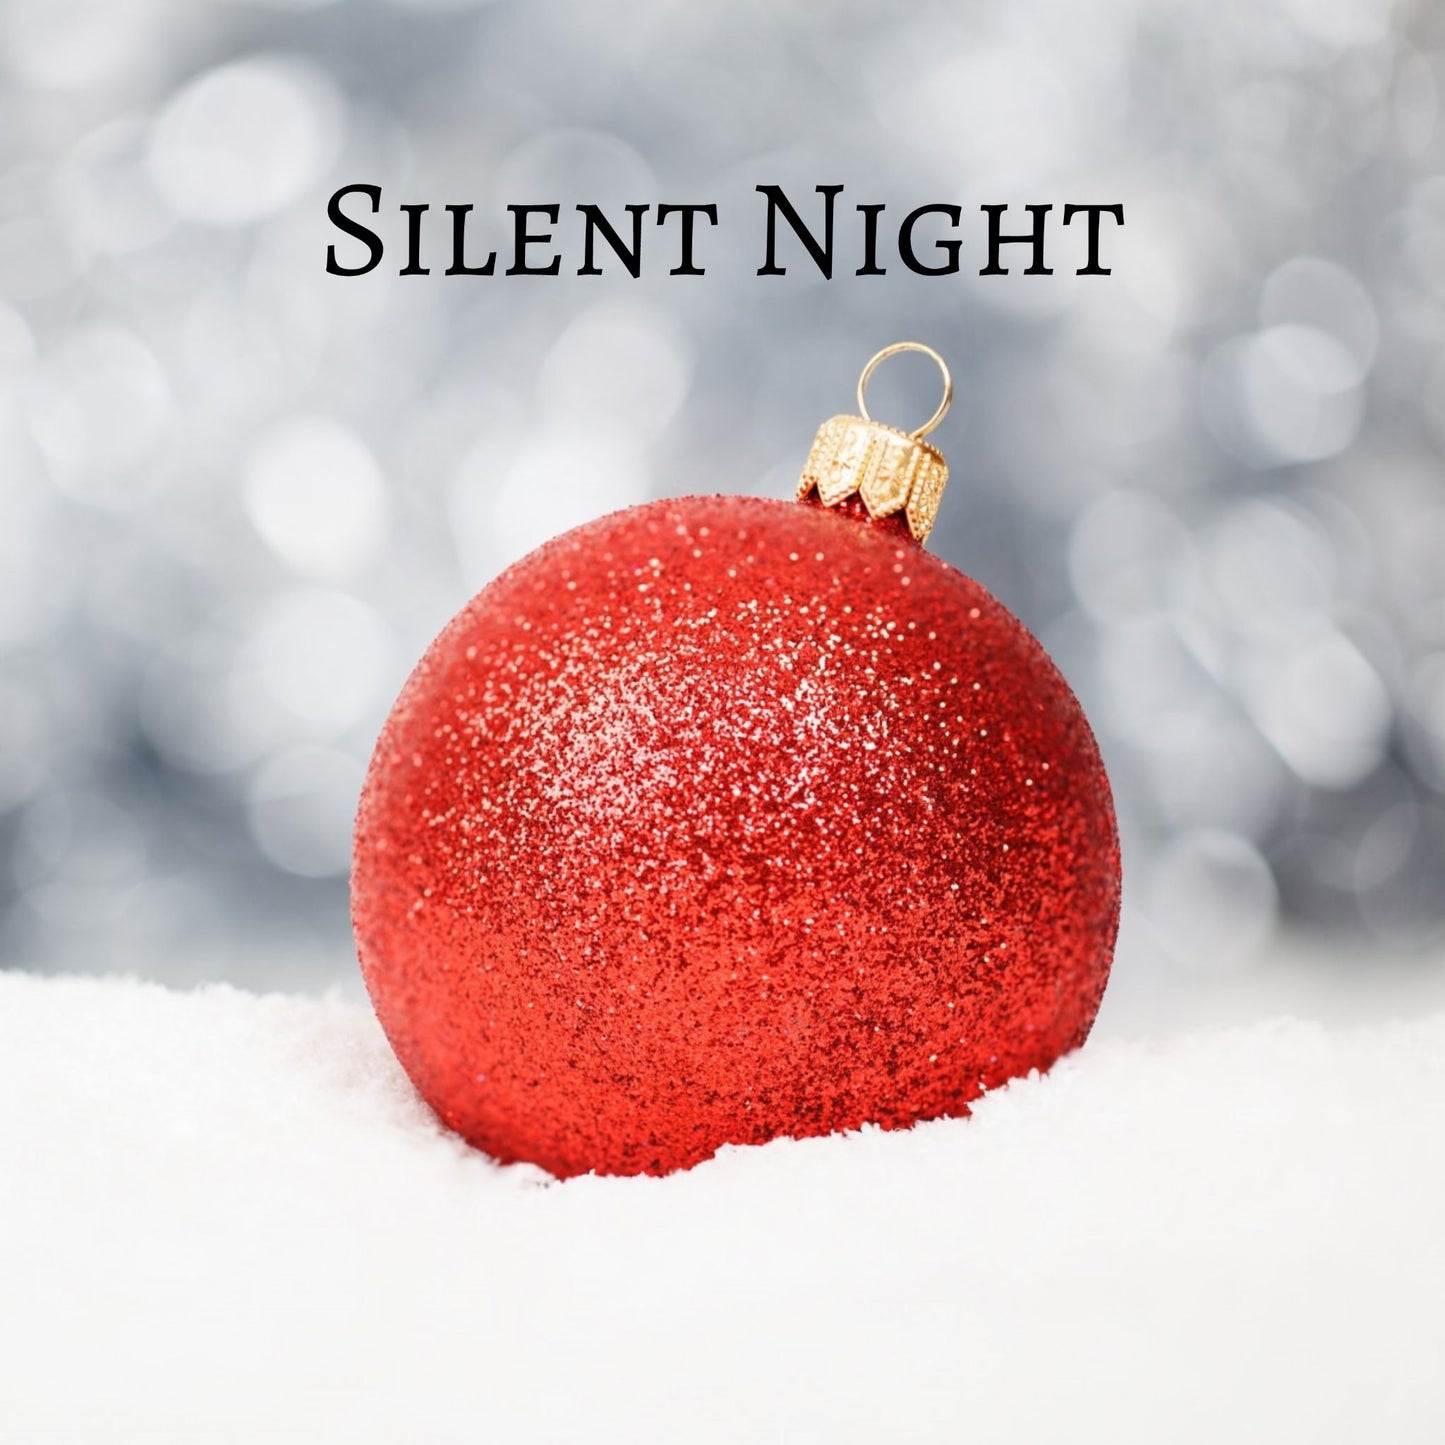 CD Cover of song Silent Night